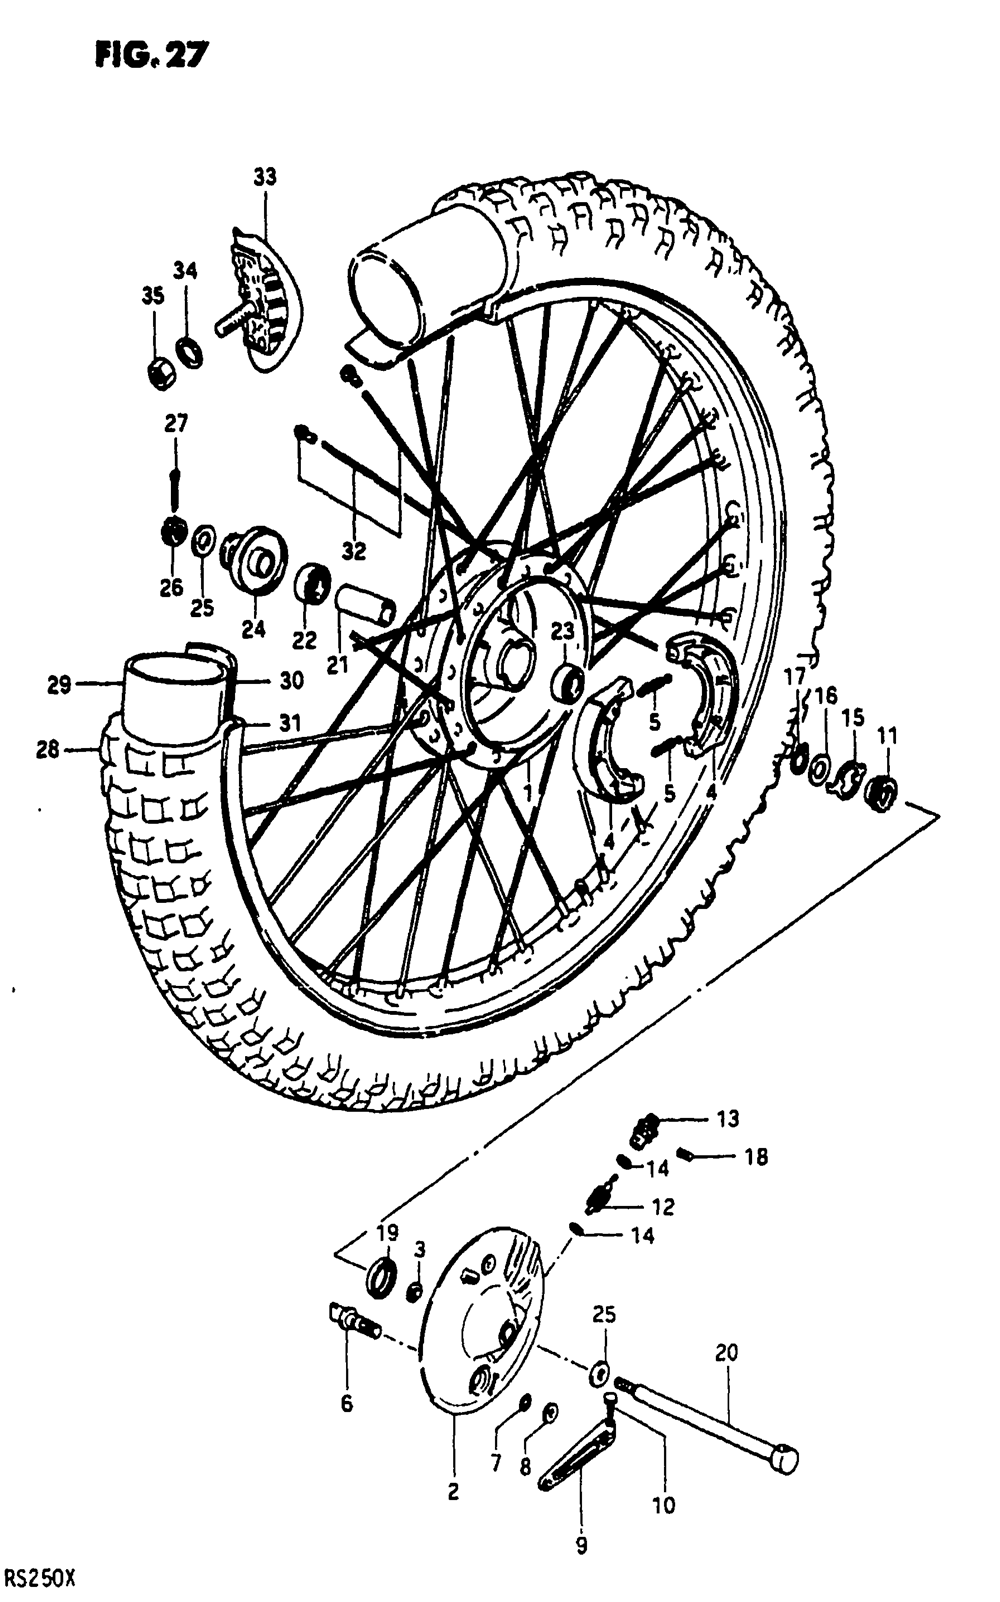 Front wheel (rs250x)